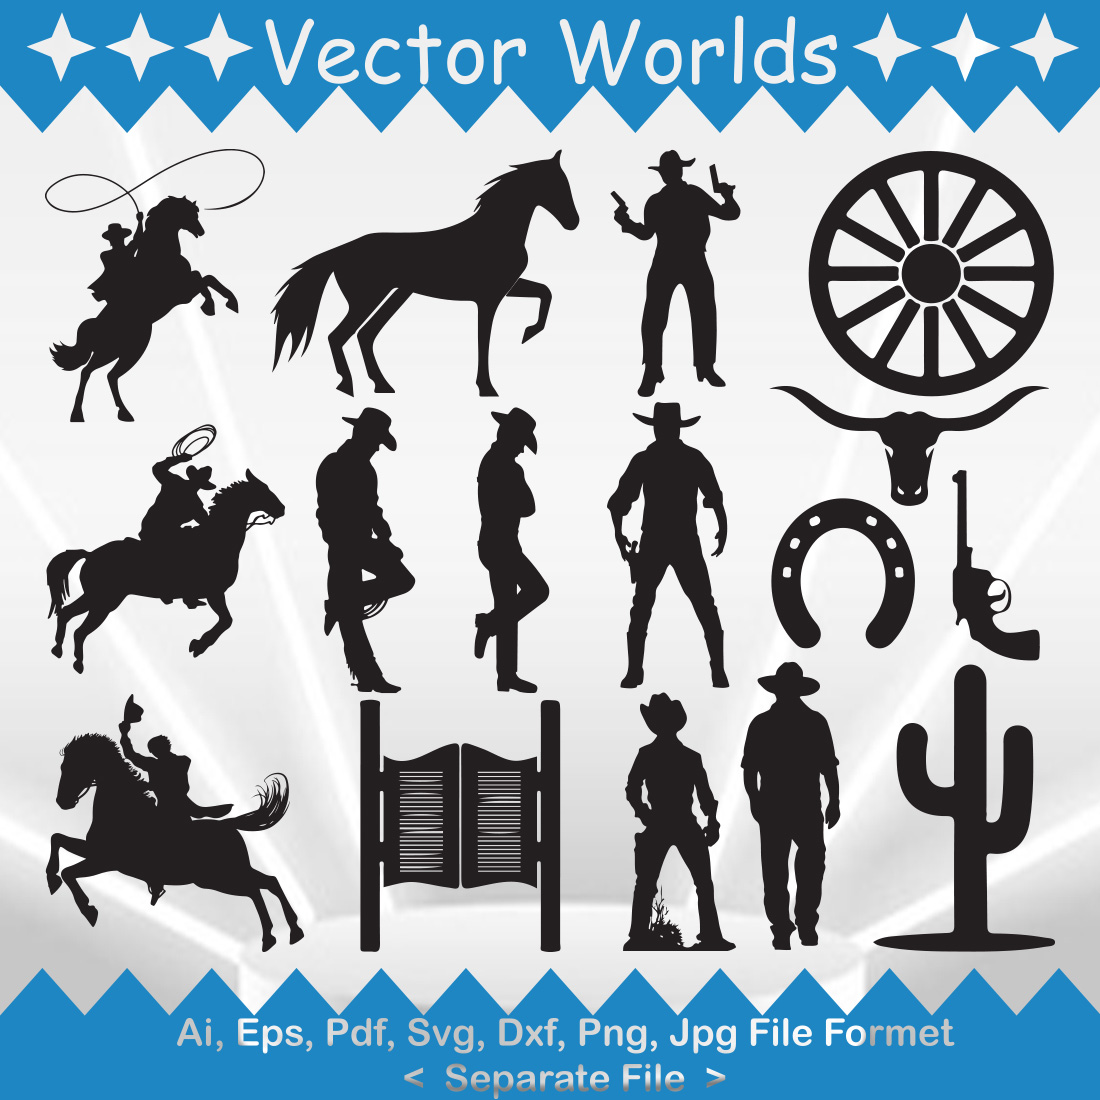 A selection of exquisite vector images of silhouettes of cowboys